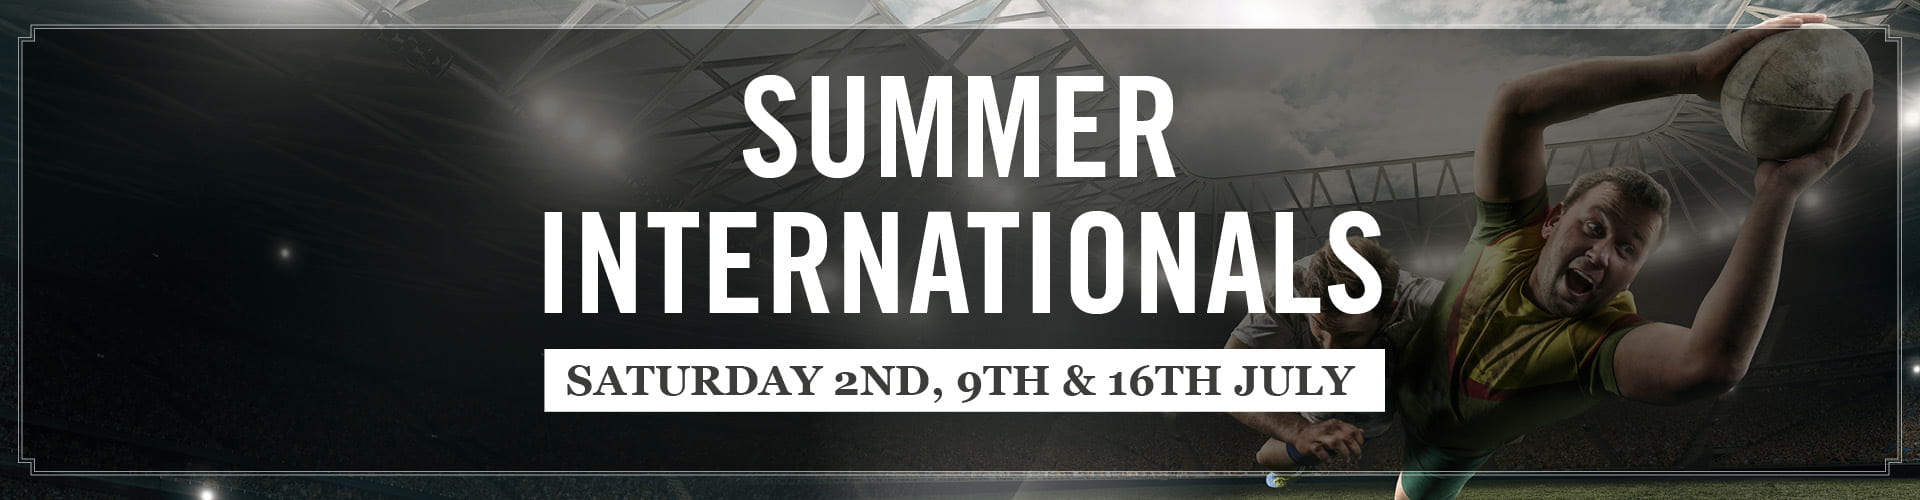 Pubs near me showing Rugby Summer Internationals | City Taverns